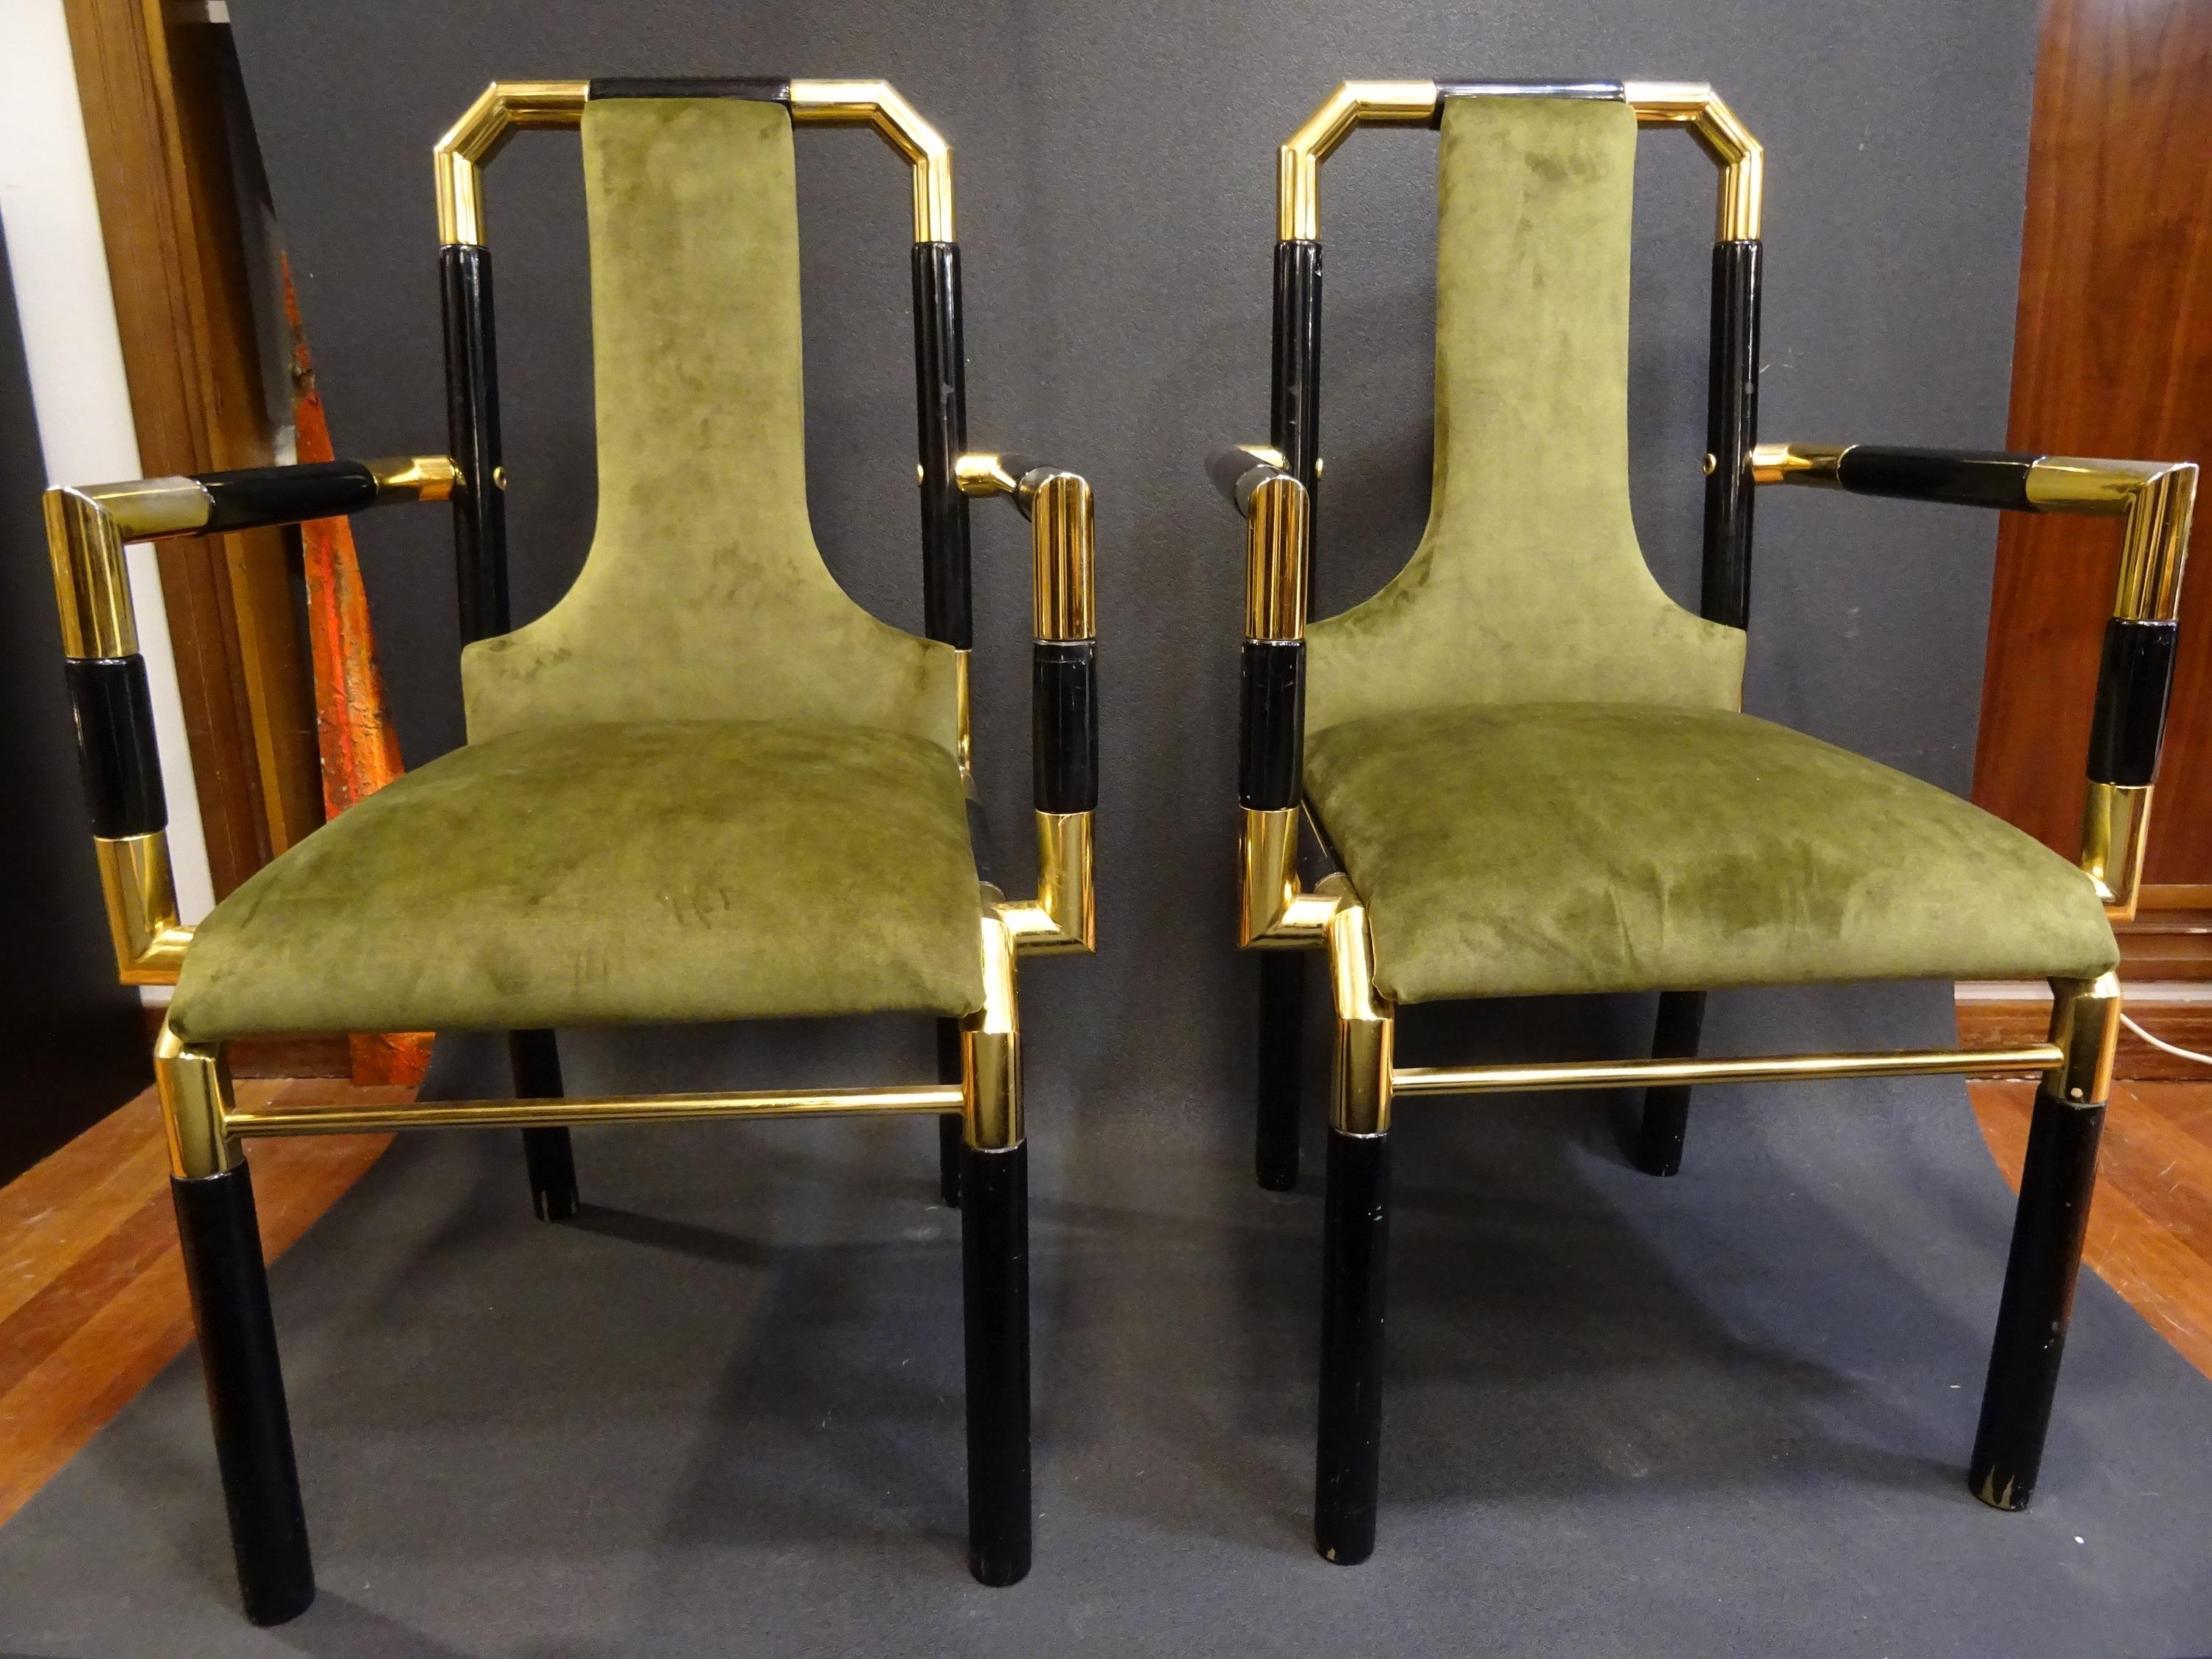 Amazing couple of armchairs by Willy Rizzo workshop, 70s, reupholstered in a beautiful olive green velvet.
Black laquered wood with golden brass, very refined pieces suitable for any room, timeless at the same time 
 with a very trendly